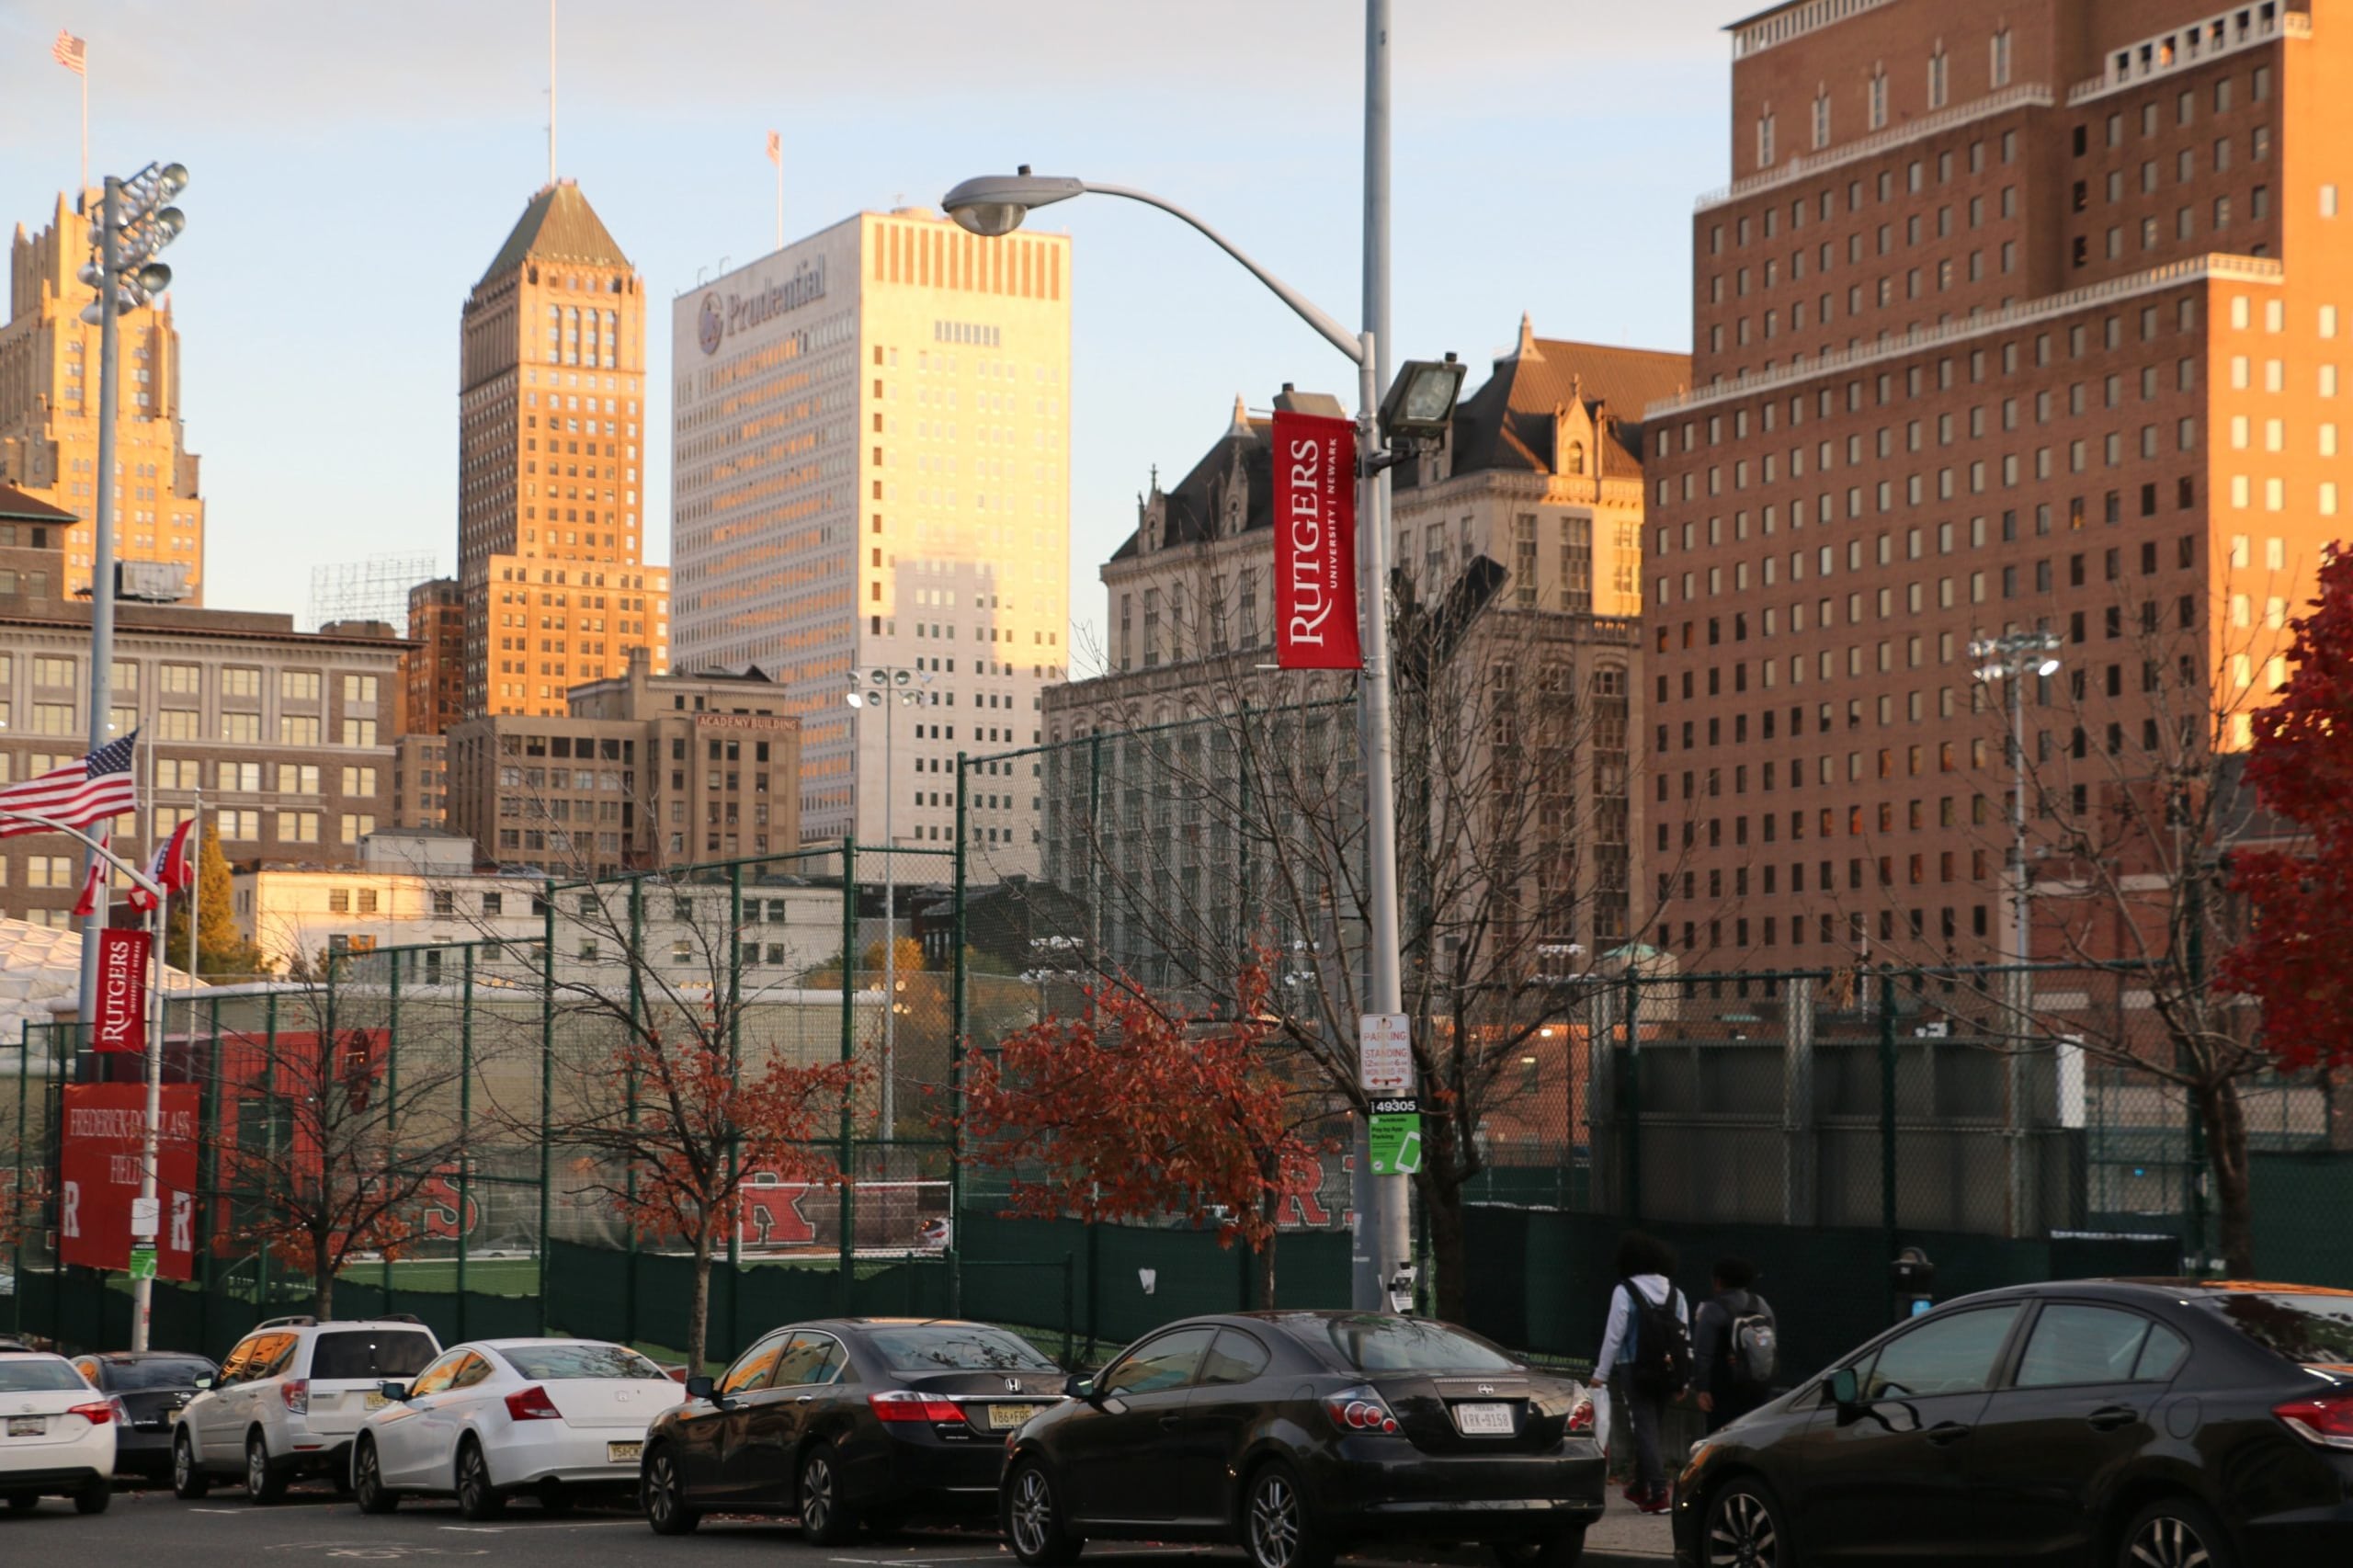 A photograph of the Newark campus of Rutgers University, with golden light reflecting against large buildings in the background.